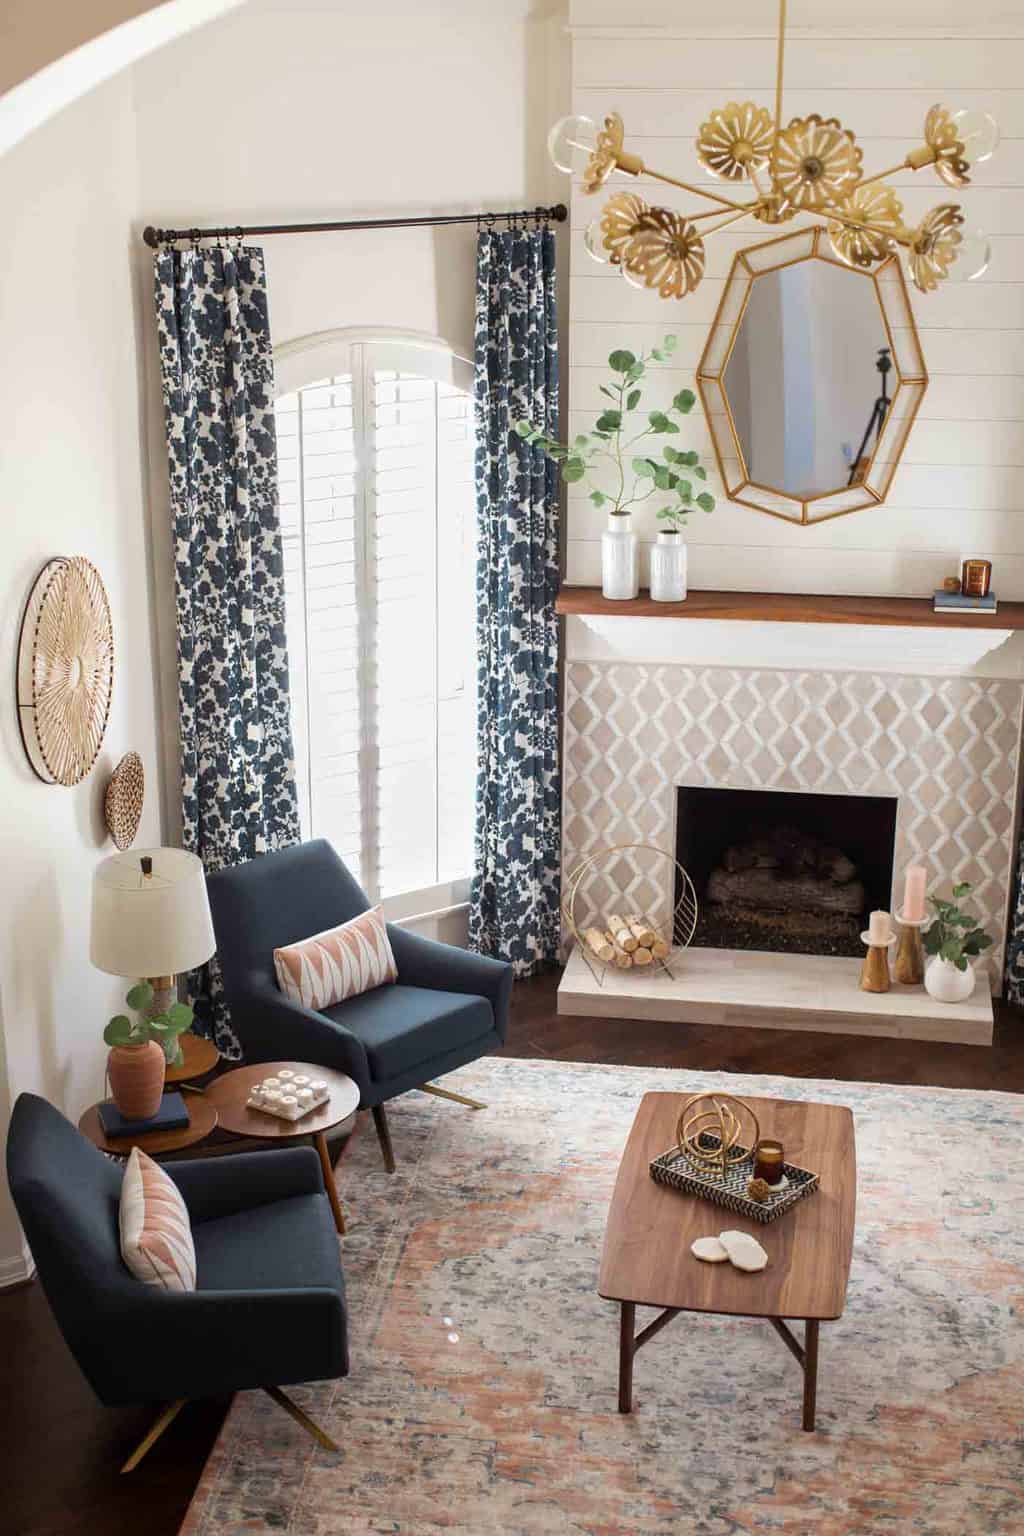 16 Amazing Fireplace Makeover Ideas